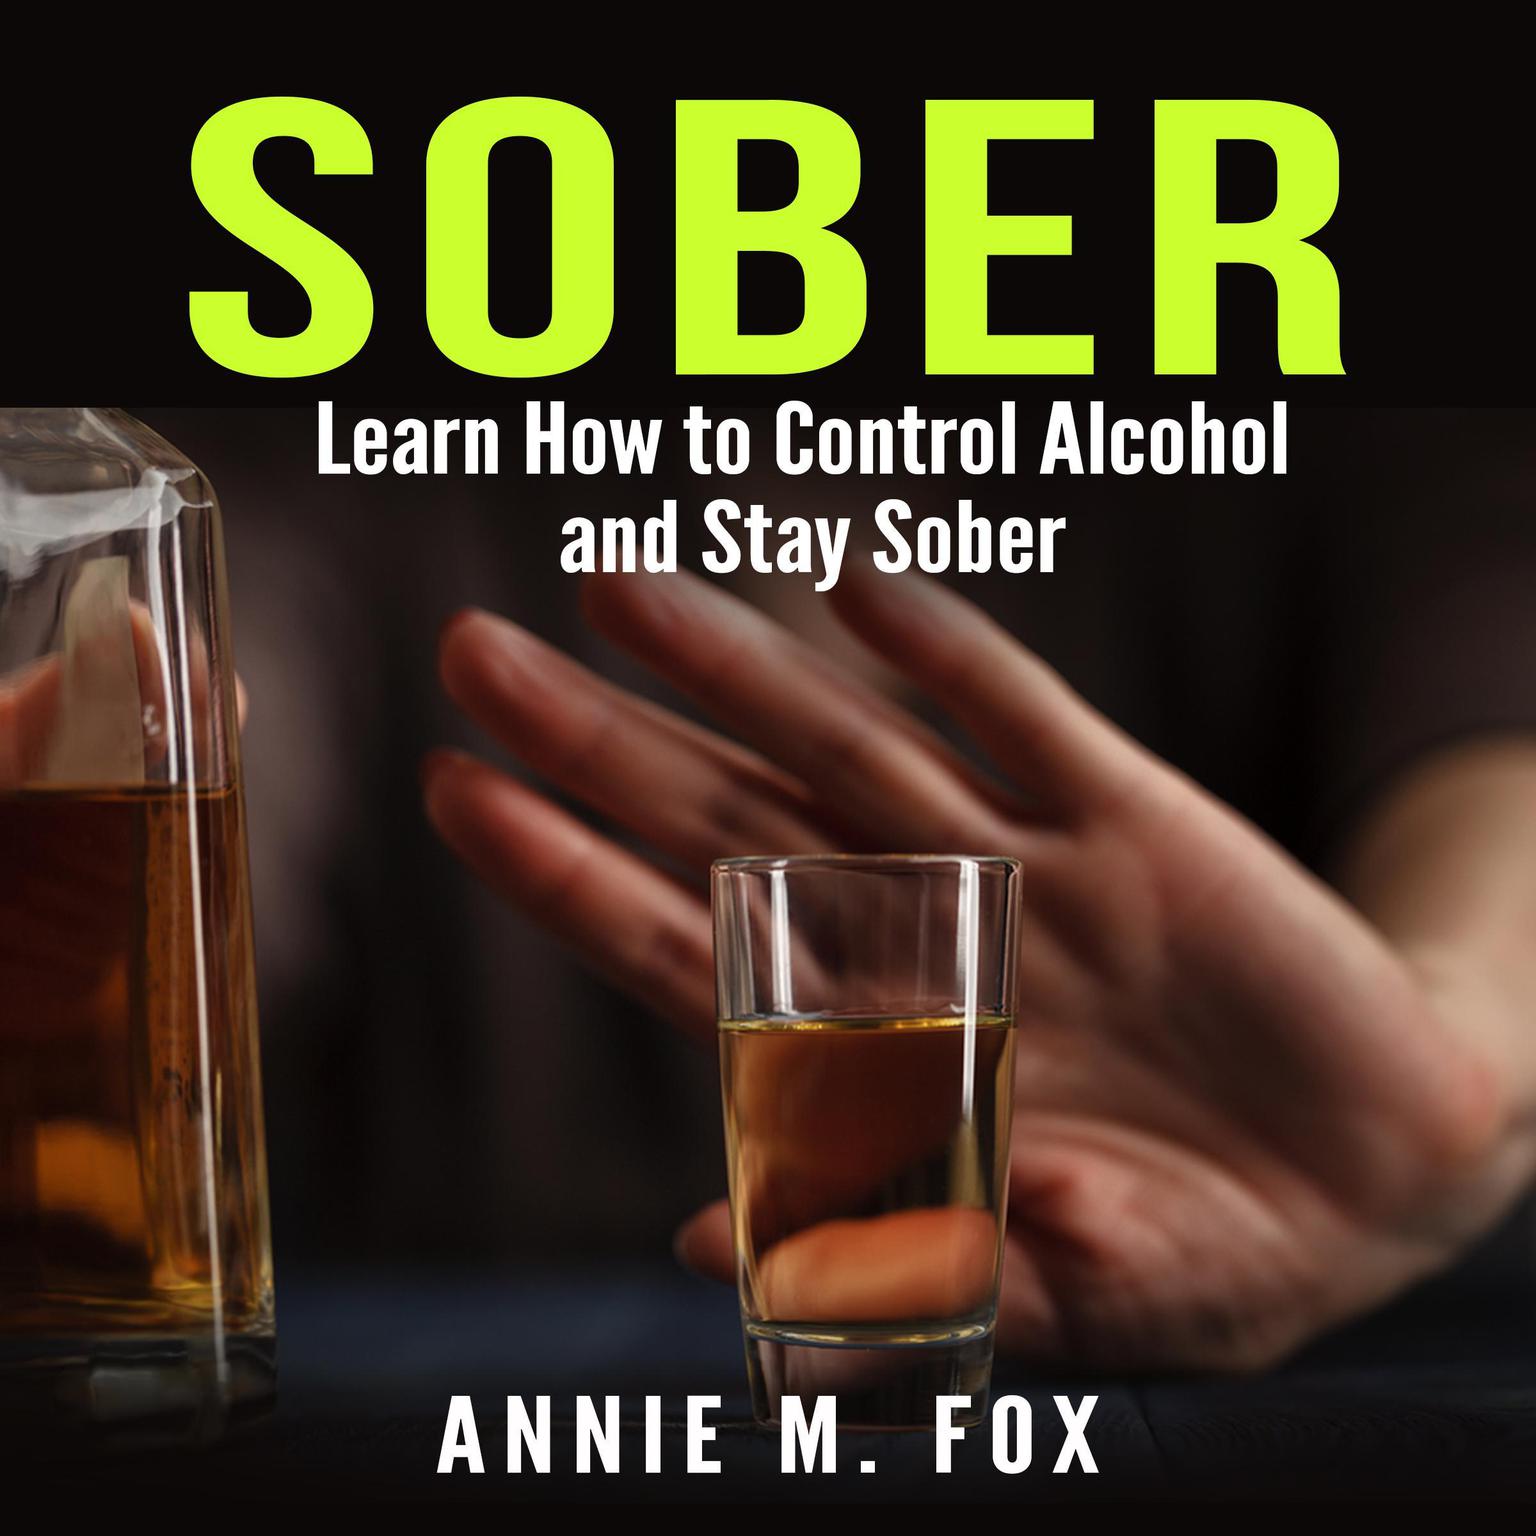 Sober: Learn How to Control Alcohol and Stay Sober Audiobook, by Annie M. Fox